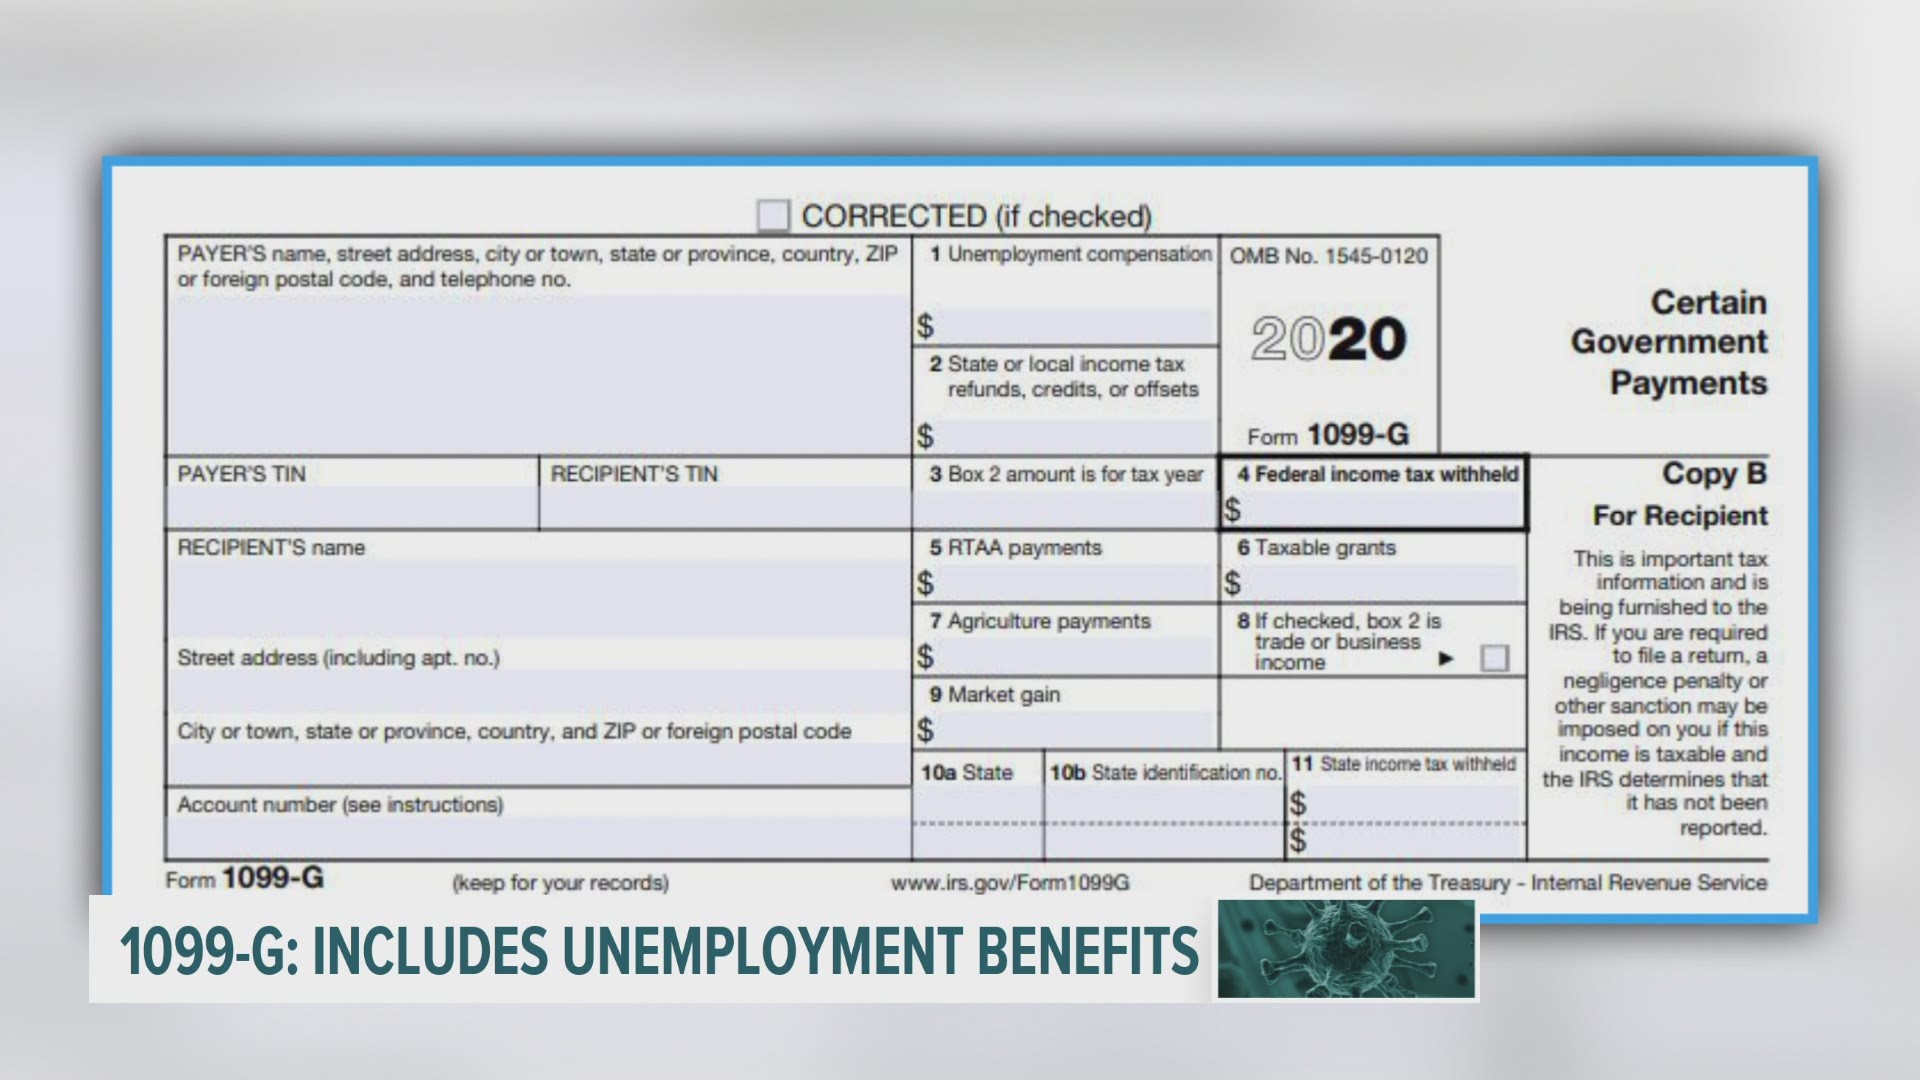 A Local 5 viewer wanted to know about the impact of receiving extra unemployment because of the CARES Act on their tax liability.